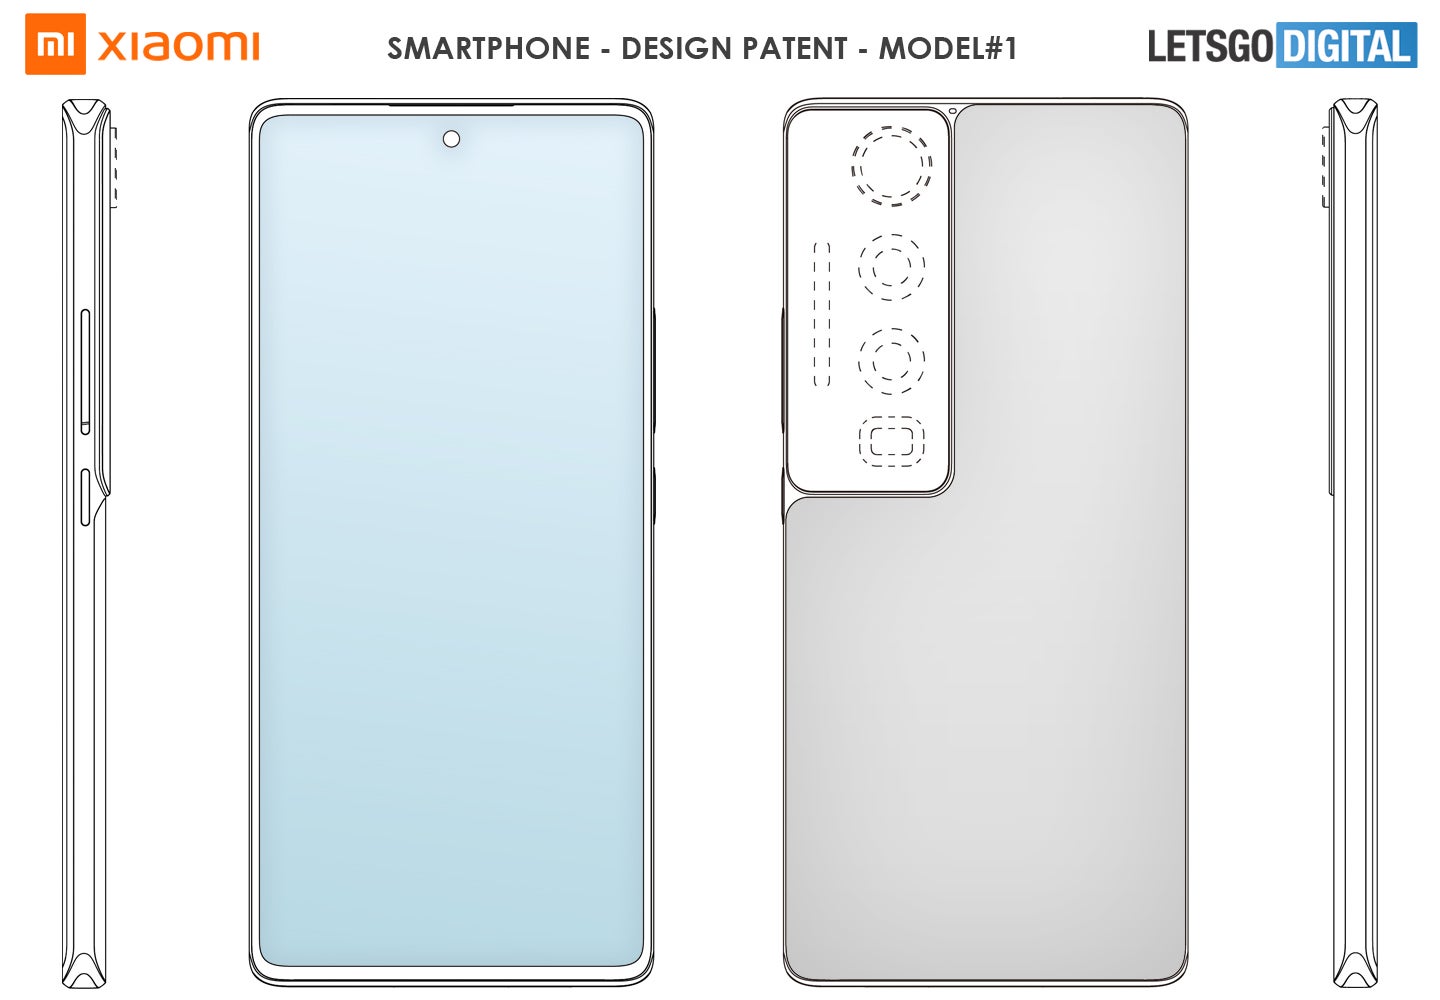 Xiaomi's latest smartphone patents hint at a continued focus on cameras